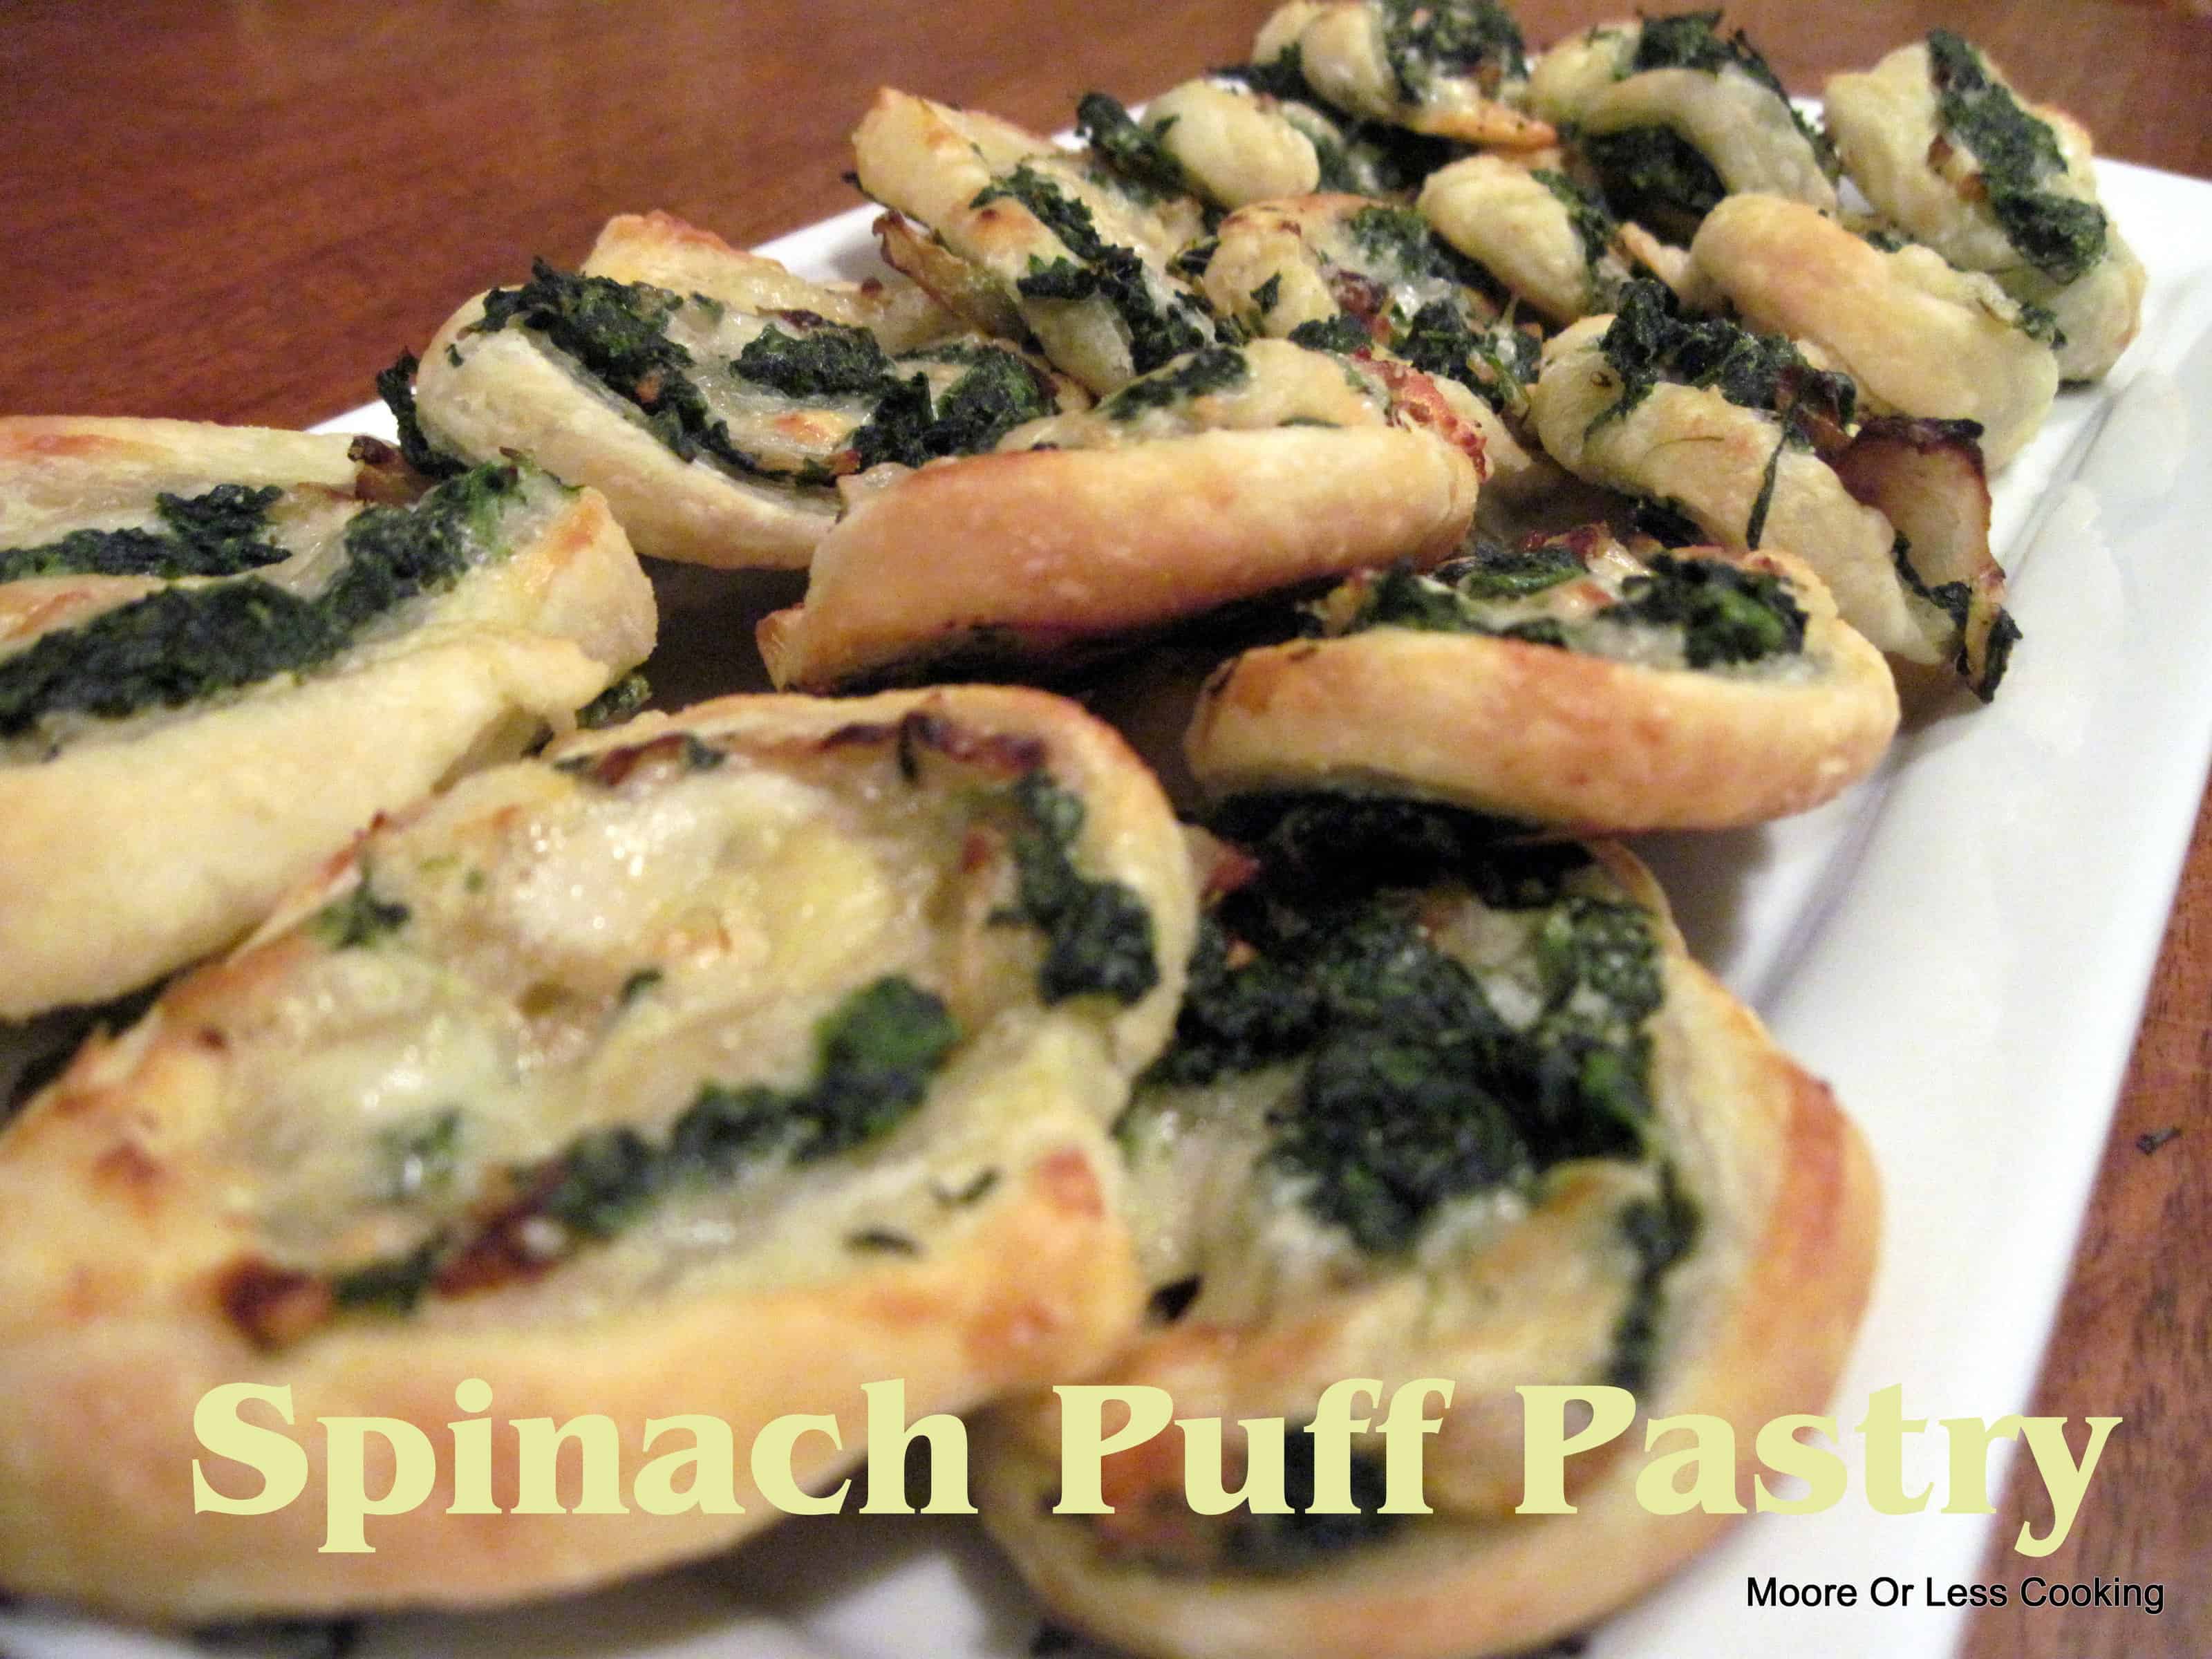 Spinach Puff Pastry